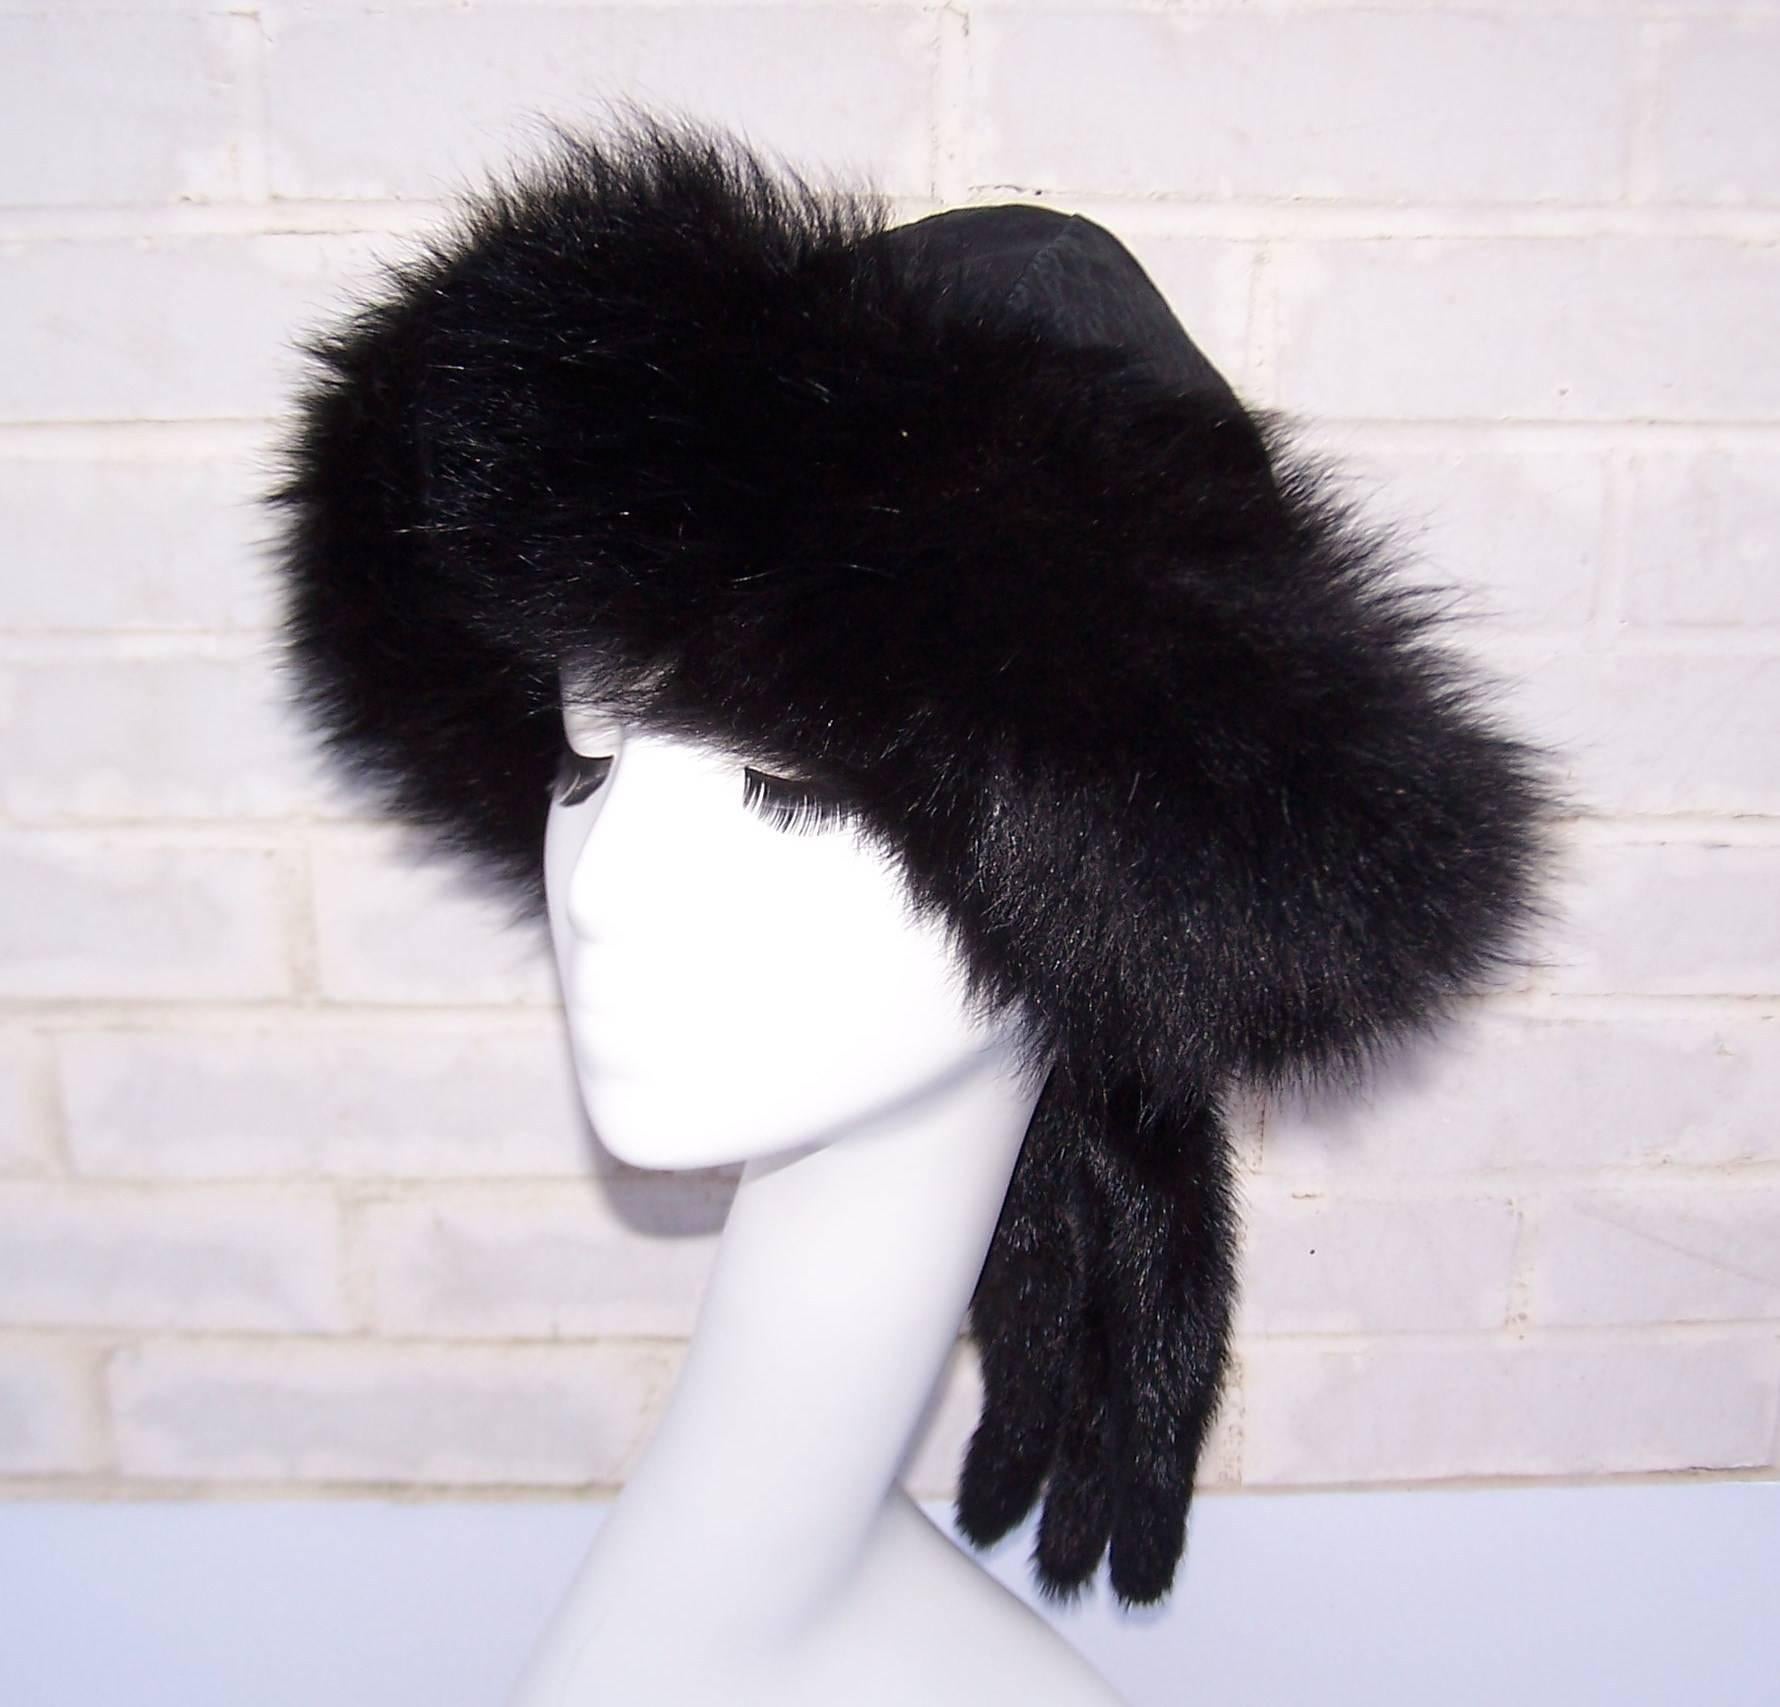 This amazing black fur and leather hat will keep you warm and stylish at the same time.  The body of the hat is a reversible textured leather with satin quilting on the alternate side.  It is trimmed in thick fox fur with fur 'tails' which are